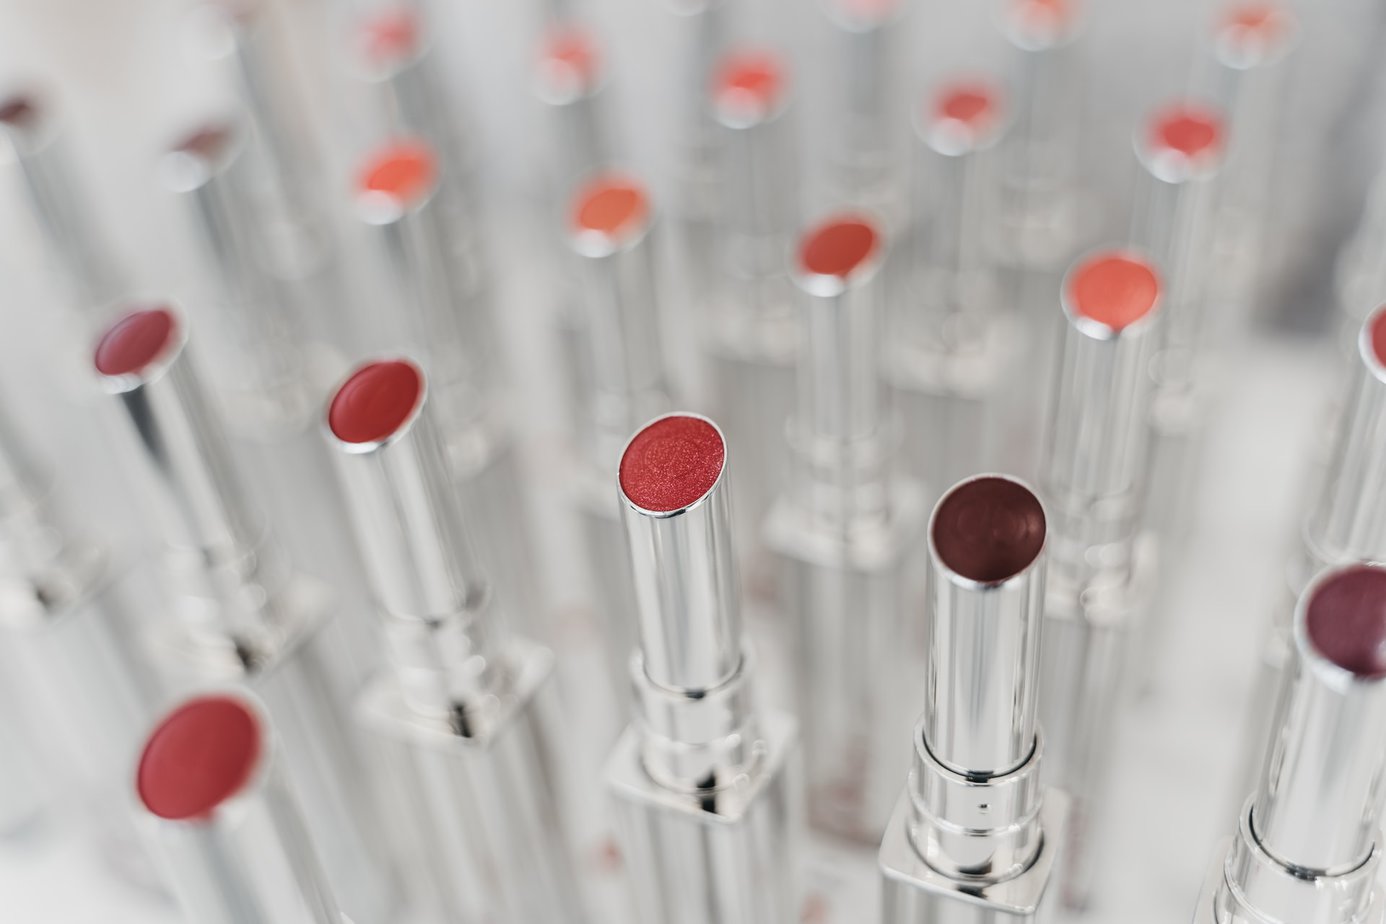 No more misguided lipstick purchases! Pick the right shade for your type of beauty